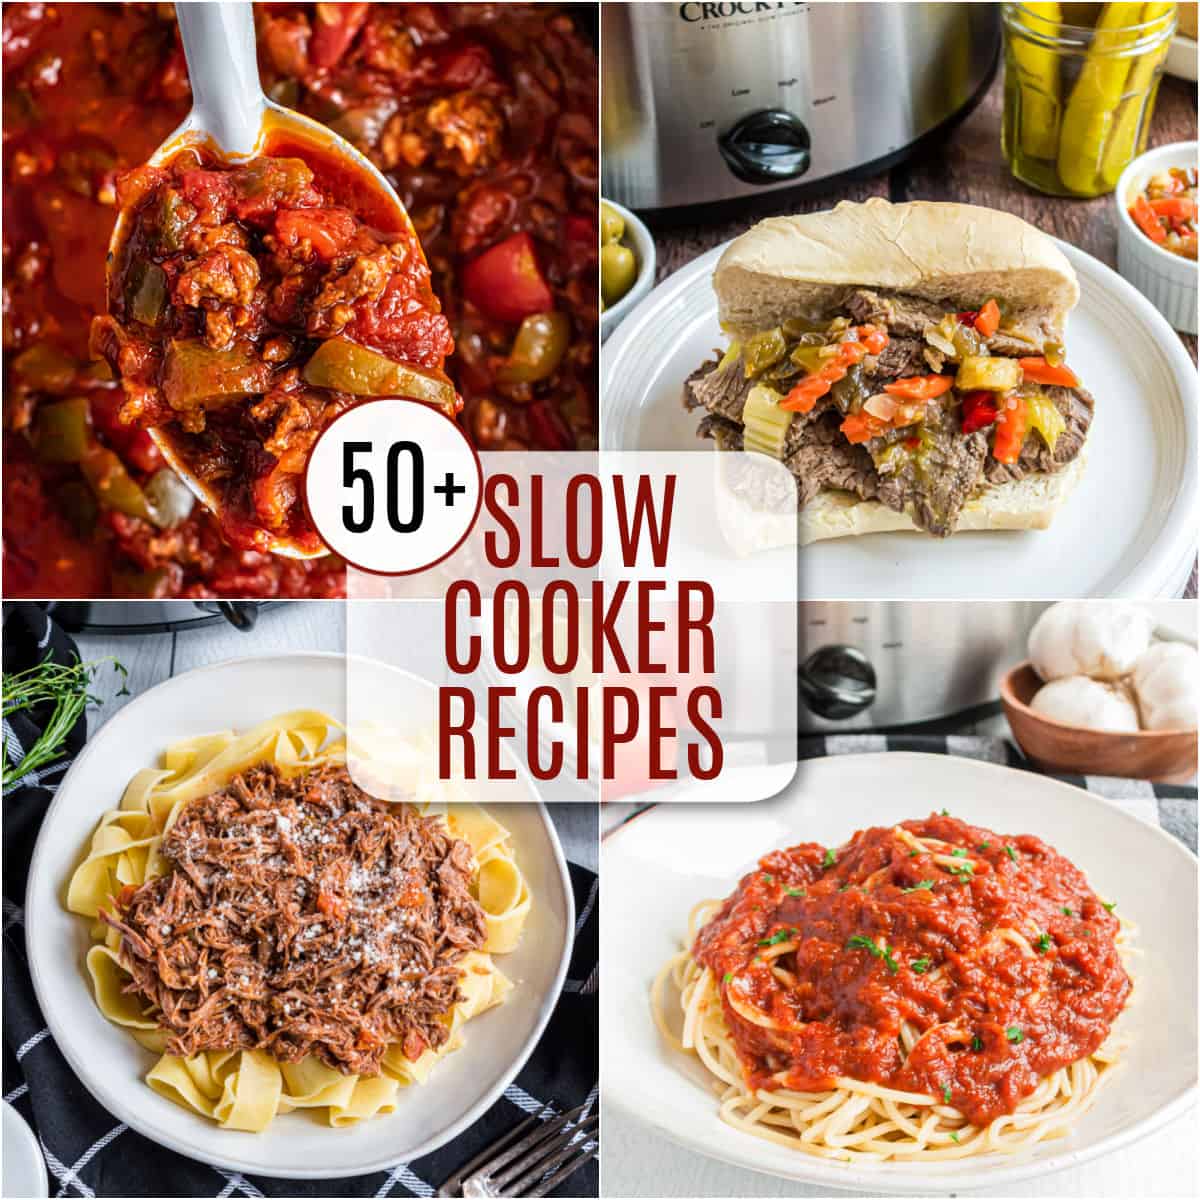 50+ Easy Slow Cooker Recipes - Shugary Sweets